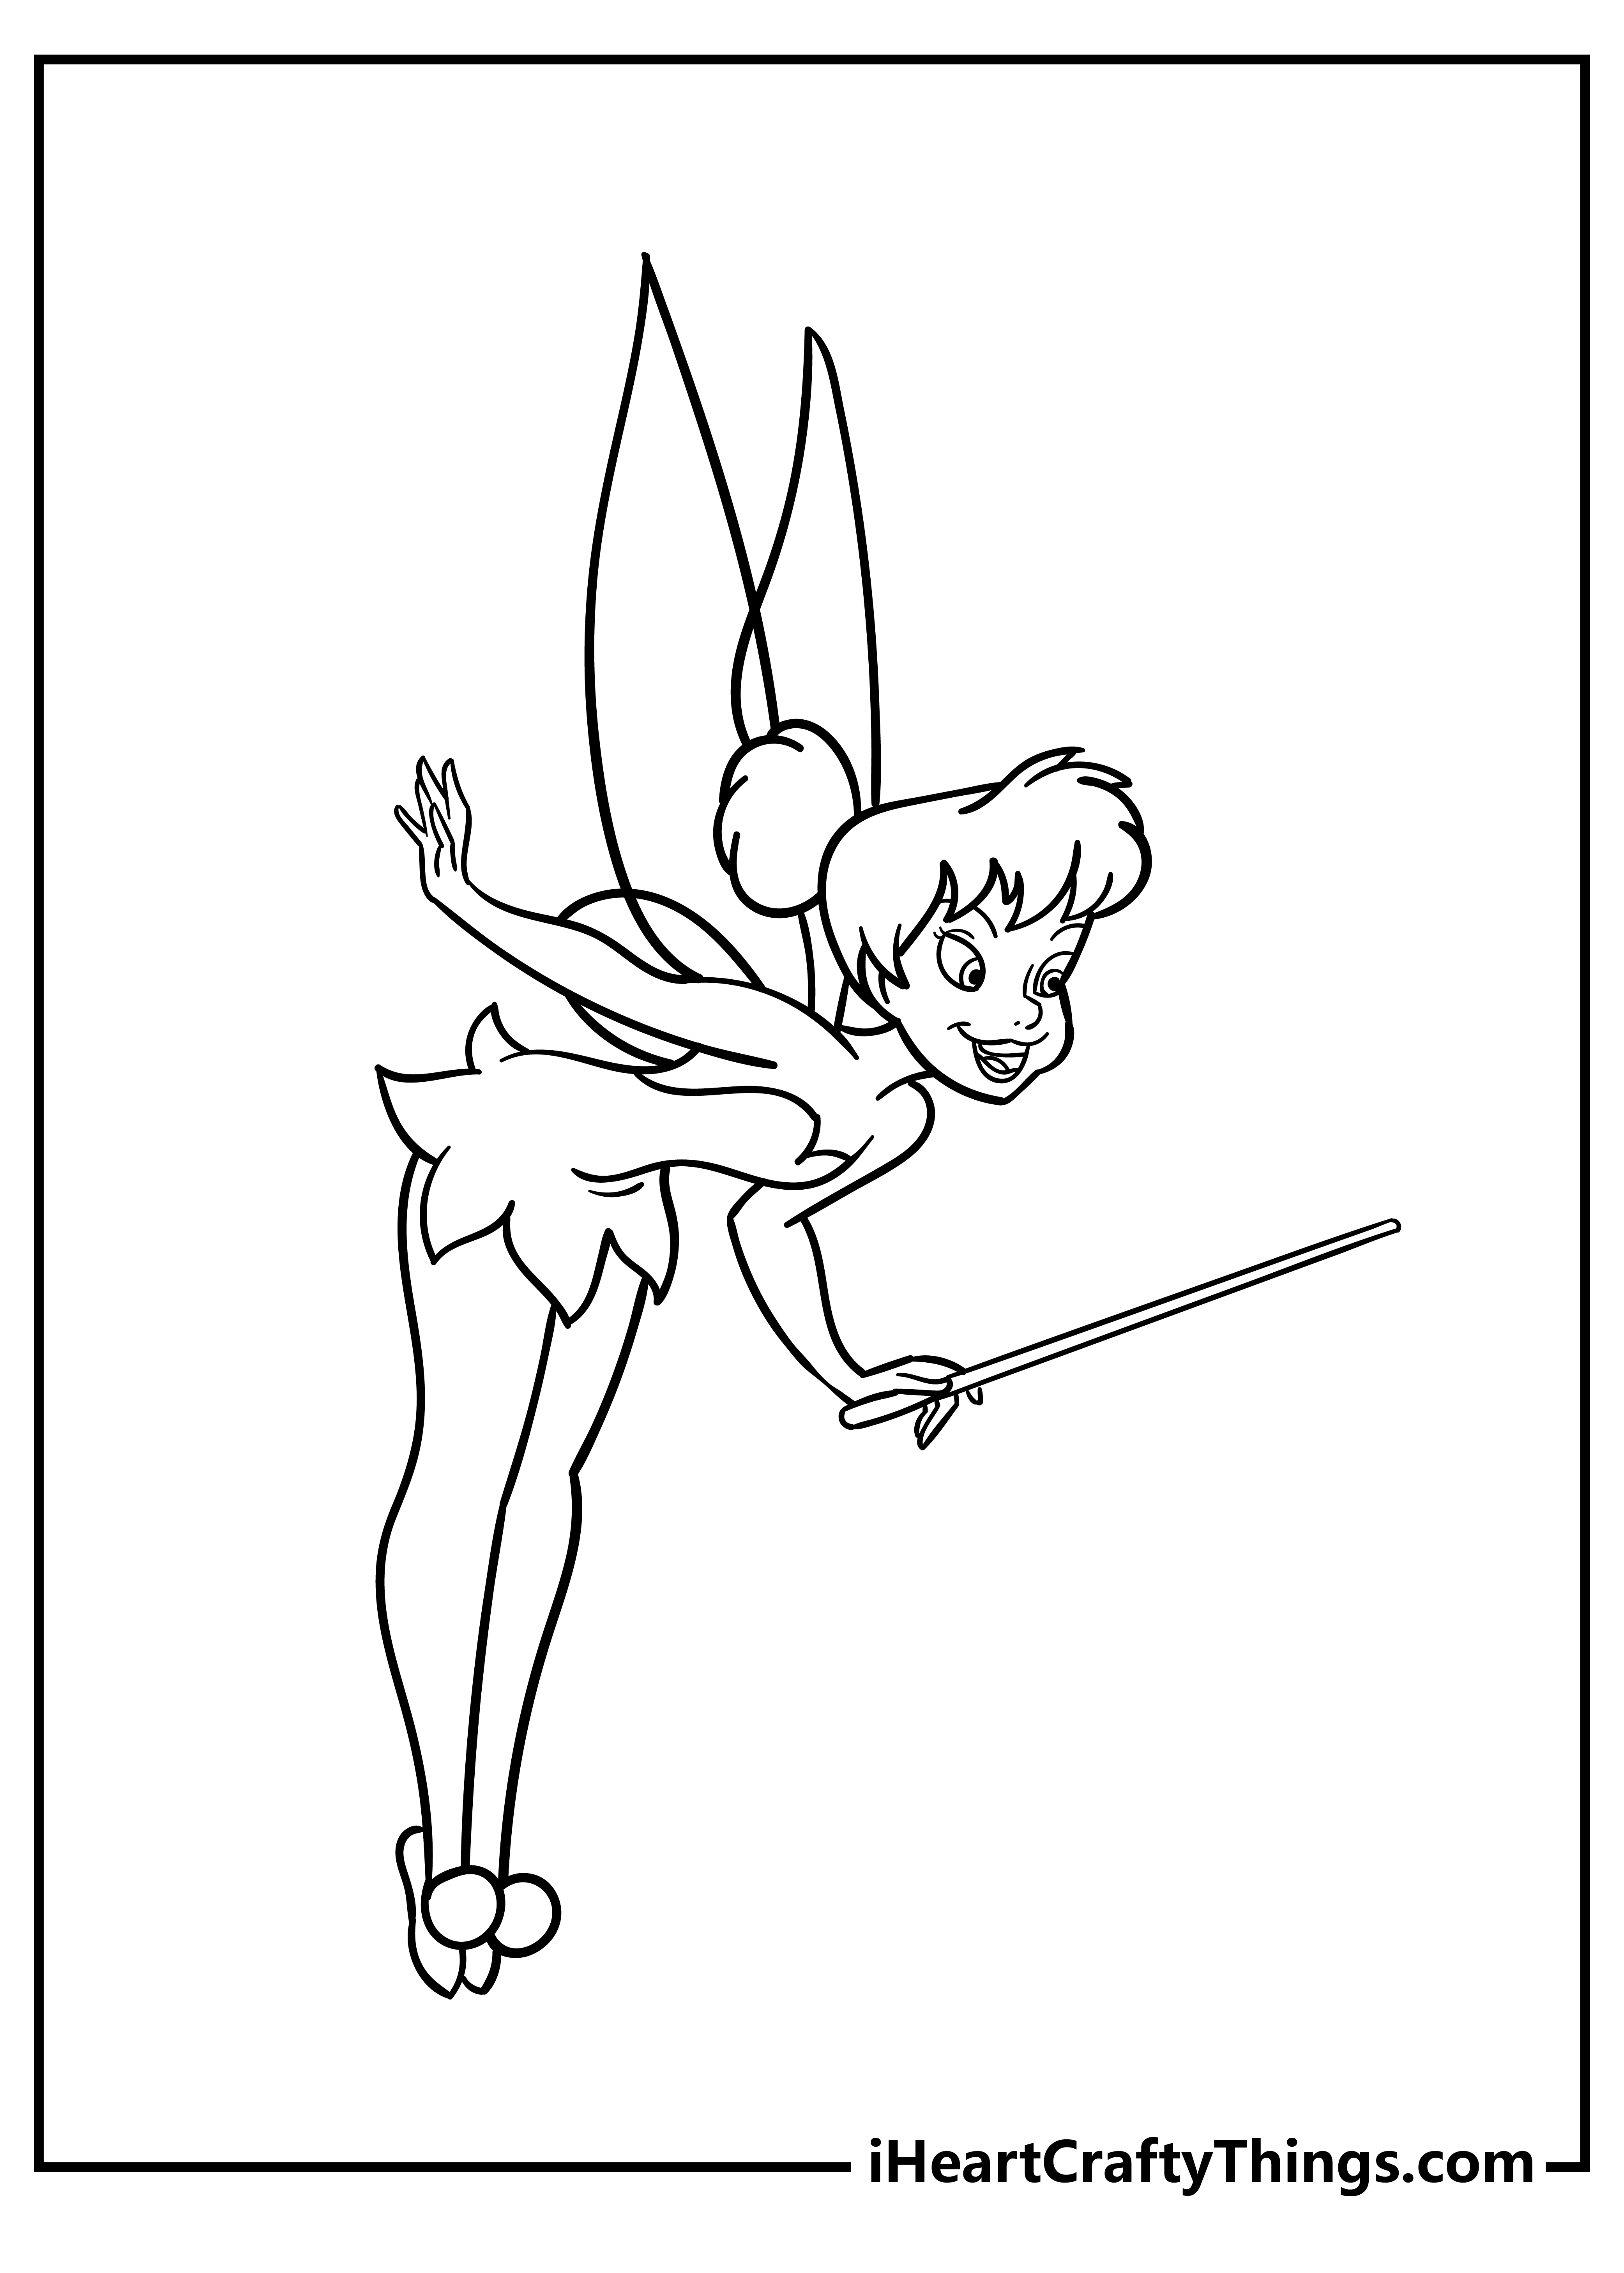 Tinkerbell Coloring Pages free pdf download